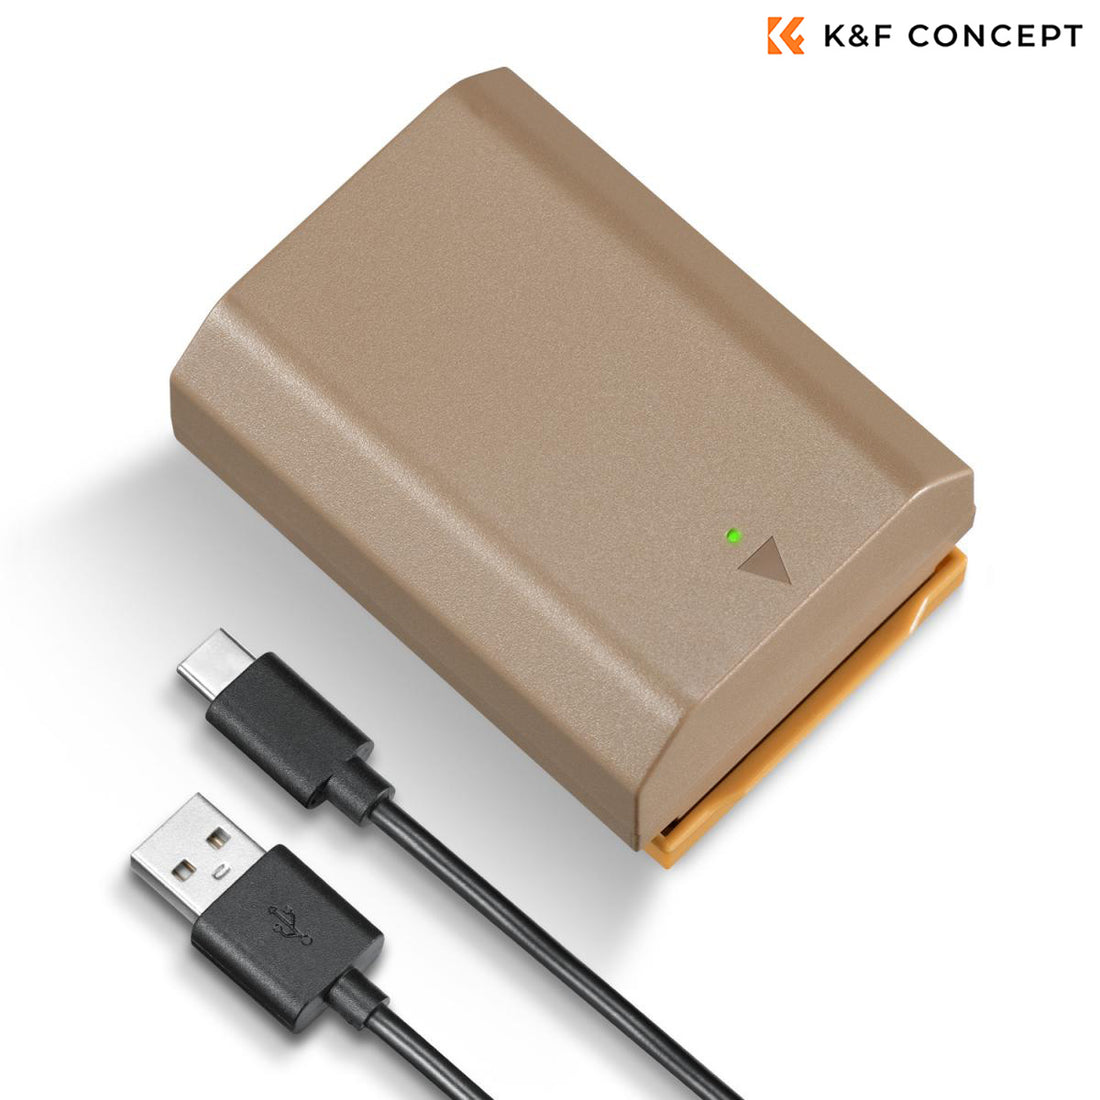 K&amp;F Concept NP-FZ100 Battery for Sony with Type C Direct Chargeable Port - KF28-0023